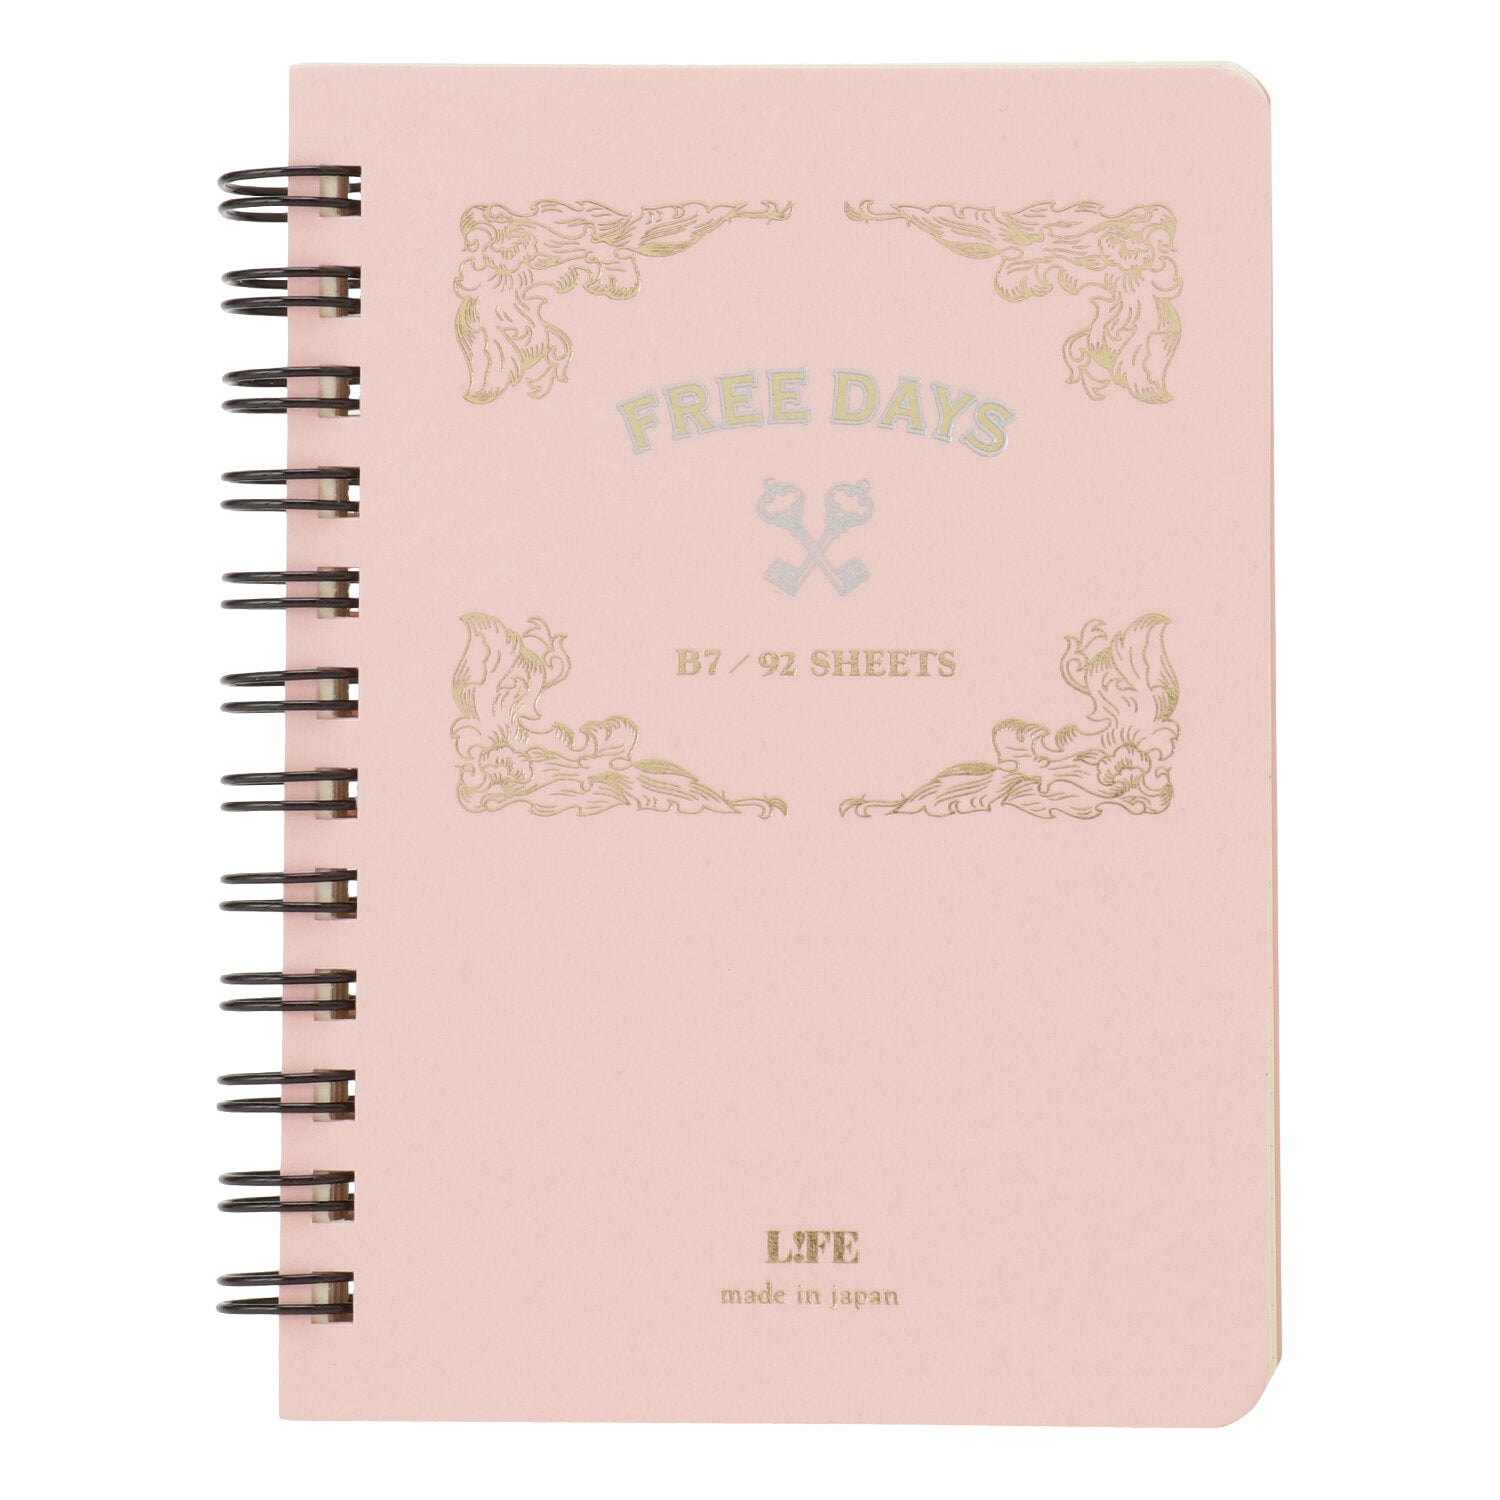 LIFE Free Days Peach x Cream Front Cover Made in Japan